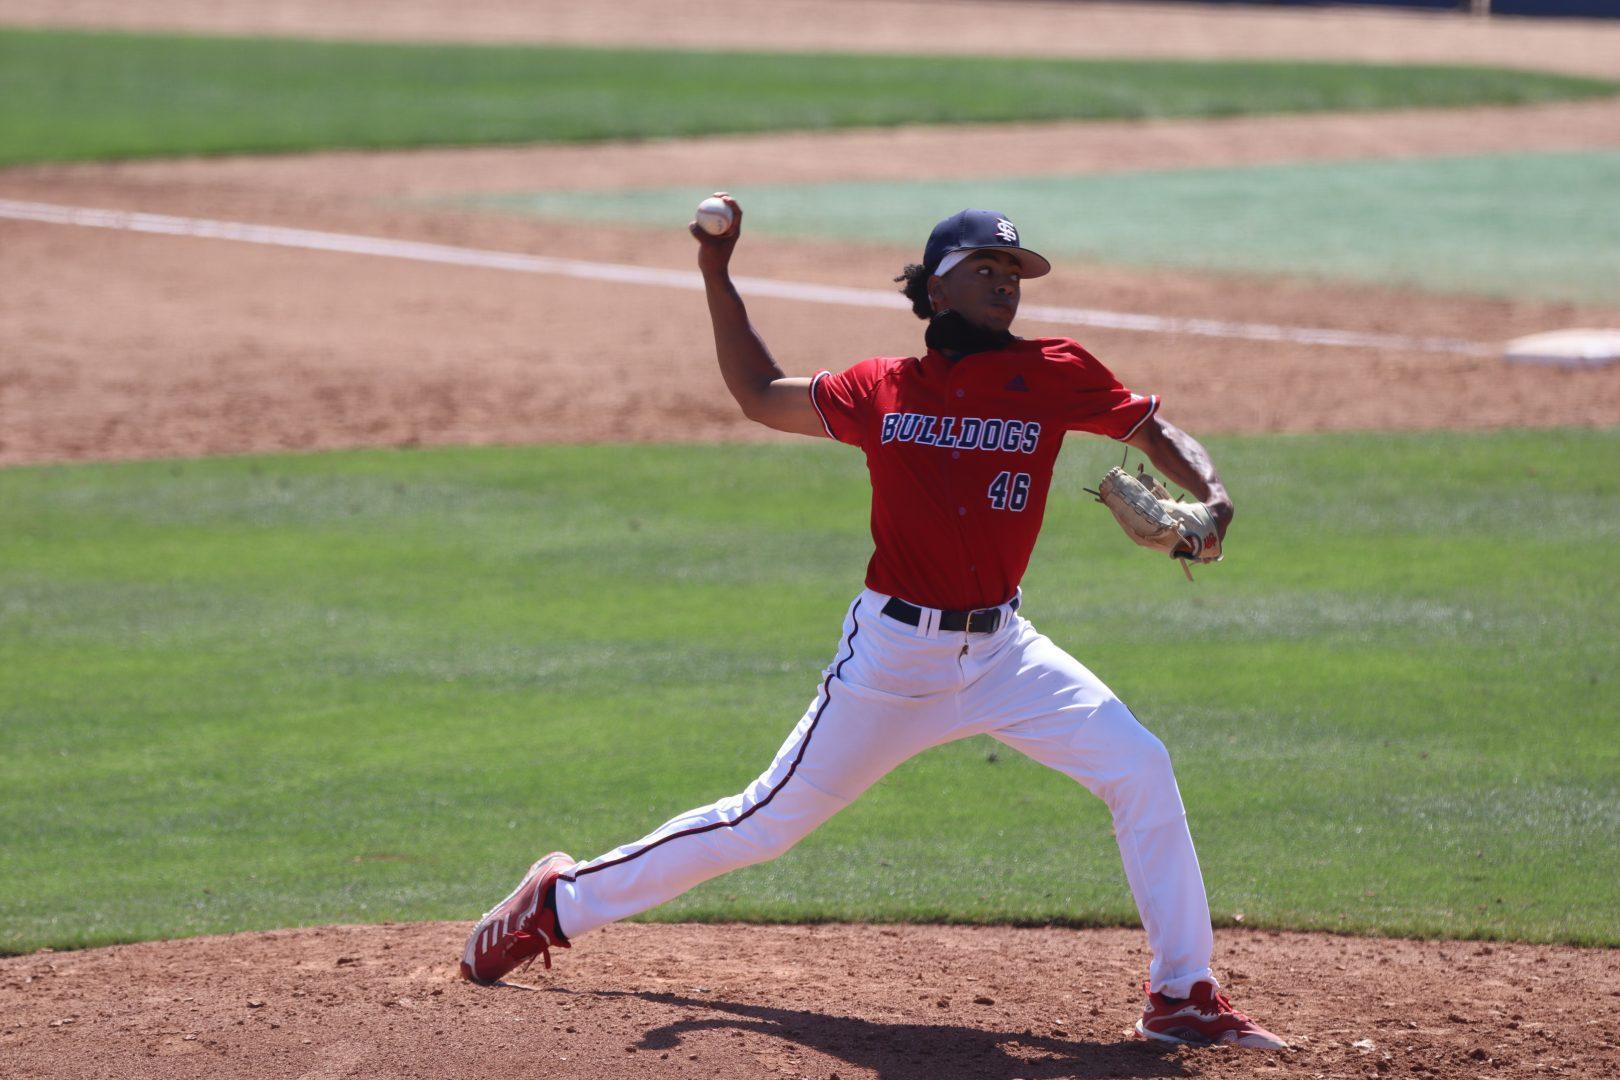 Fresno+State+pitcher+Jamison+Hill+pitches+in+the+fourth+inning+of+the+game+against+San+Diego+State+University+on+April+17%2C+2021%2C+at+Pete+Beiden+field.+%28Kameron+Thorn%2FThe+Collegian%29